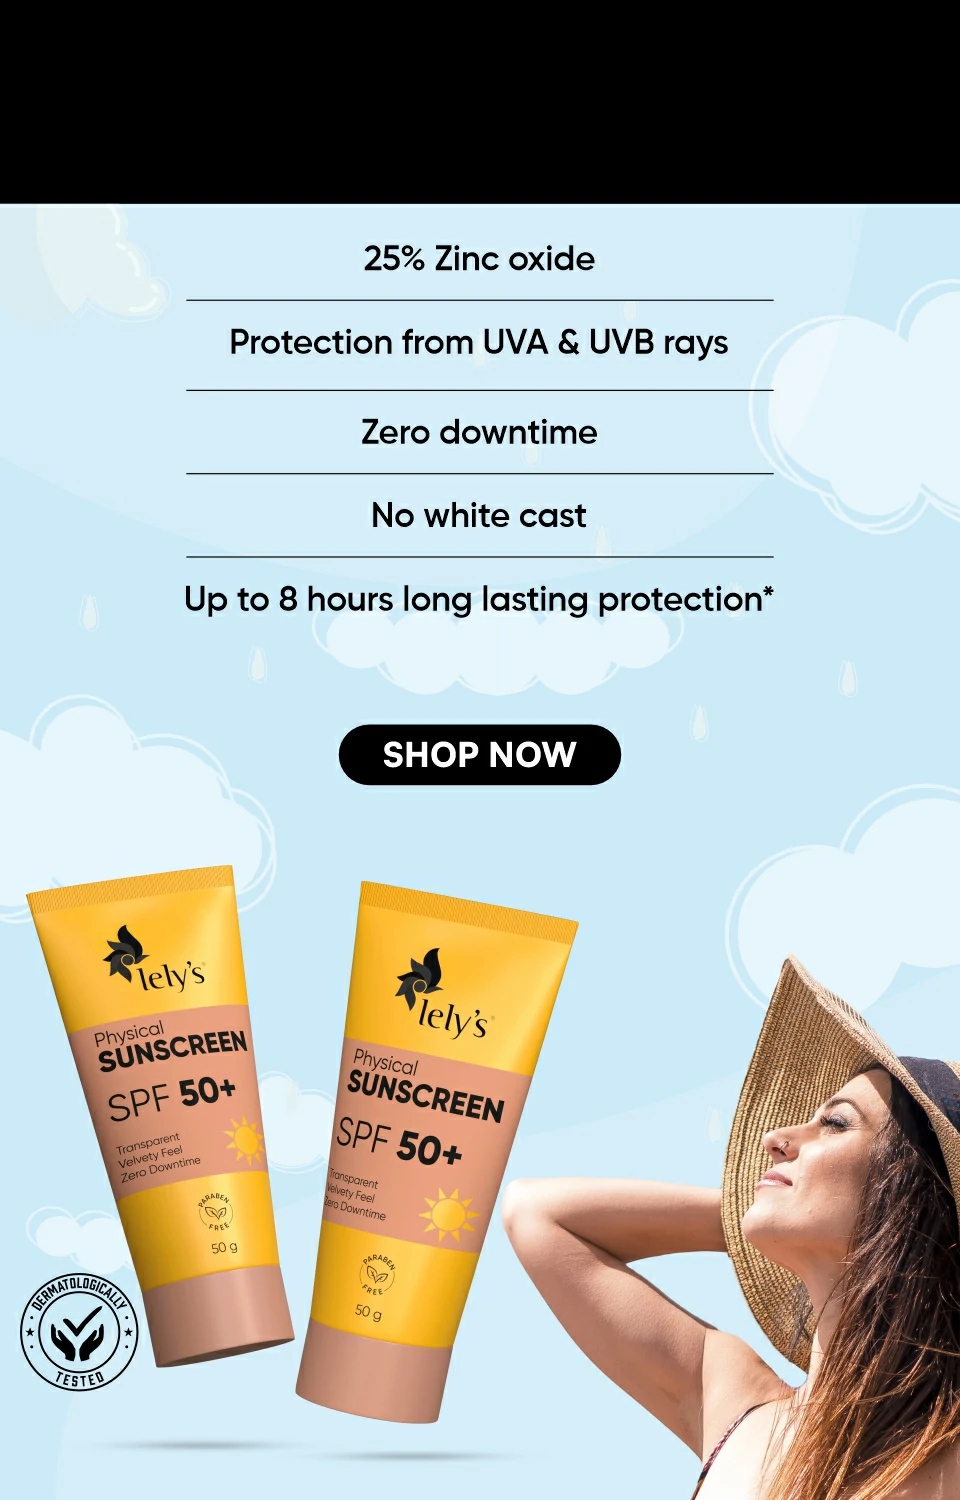 Physical Sunscreen from lelys